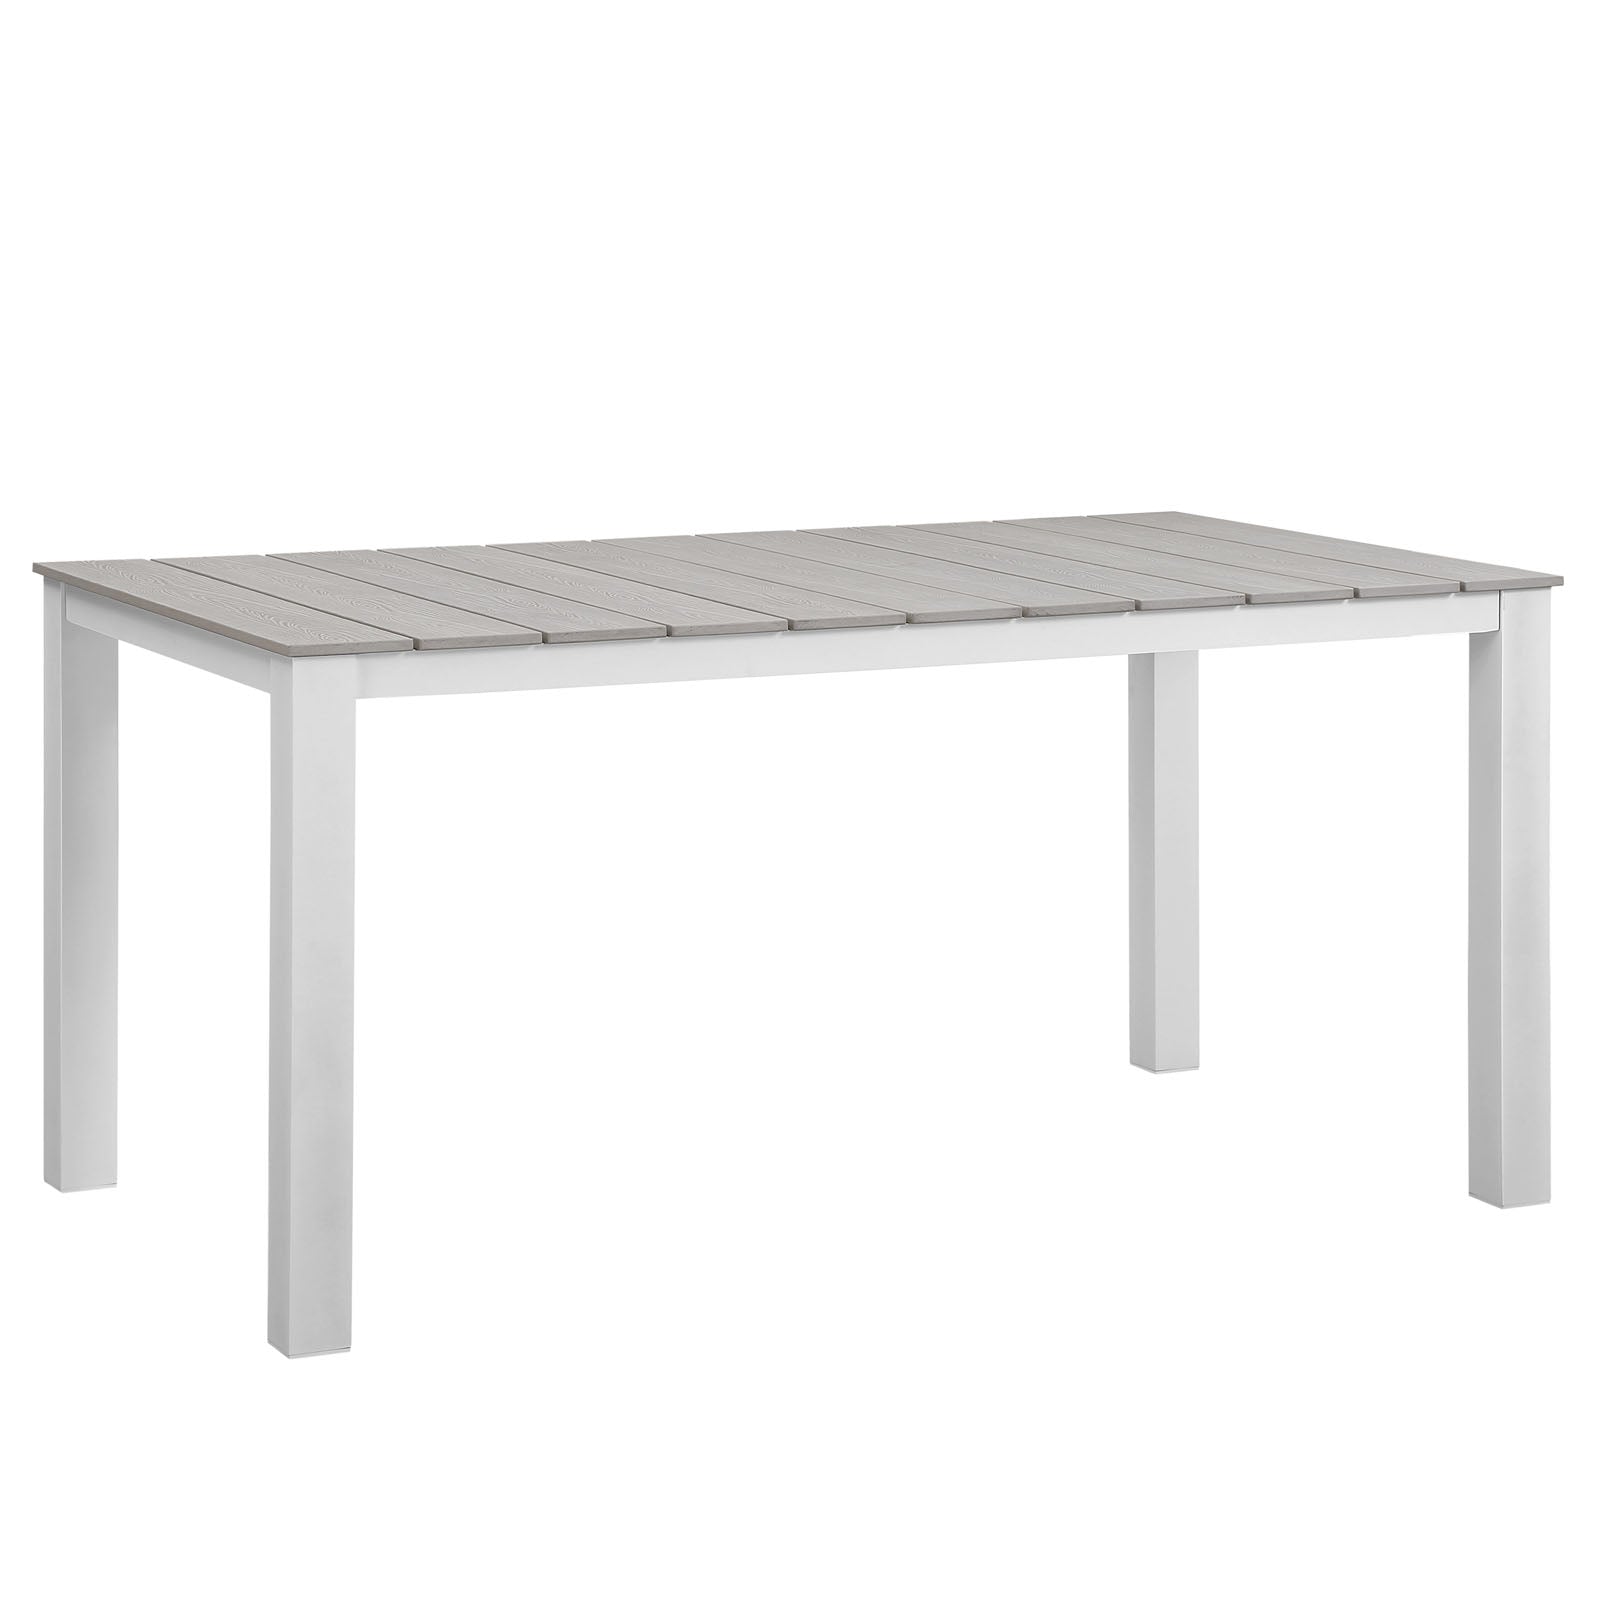 Maine 63" Outdoor Patio Dining Table - East Shore Modern Home Furnishings